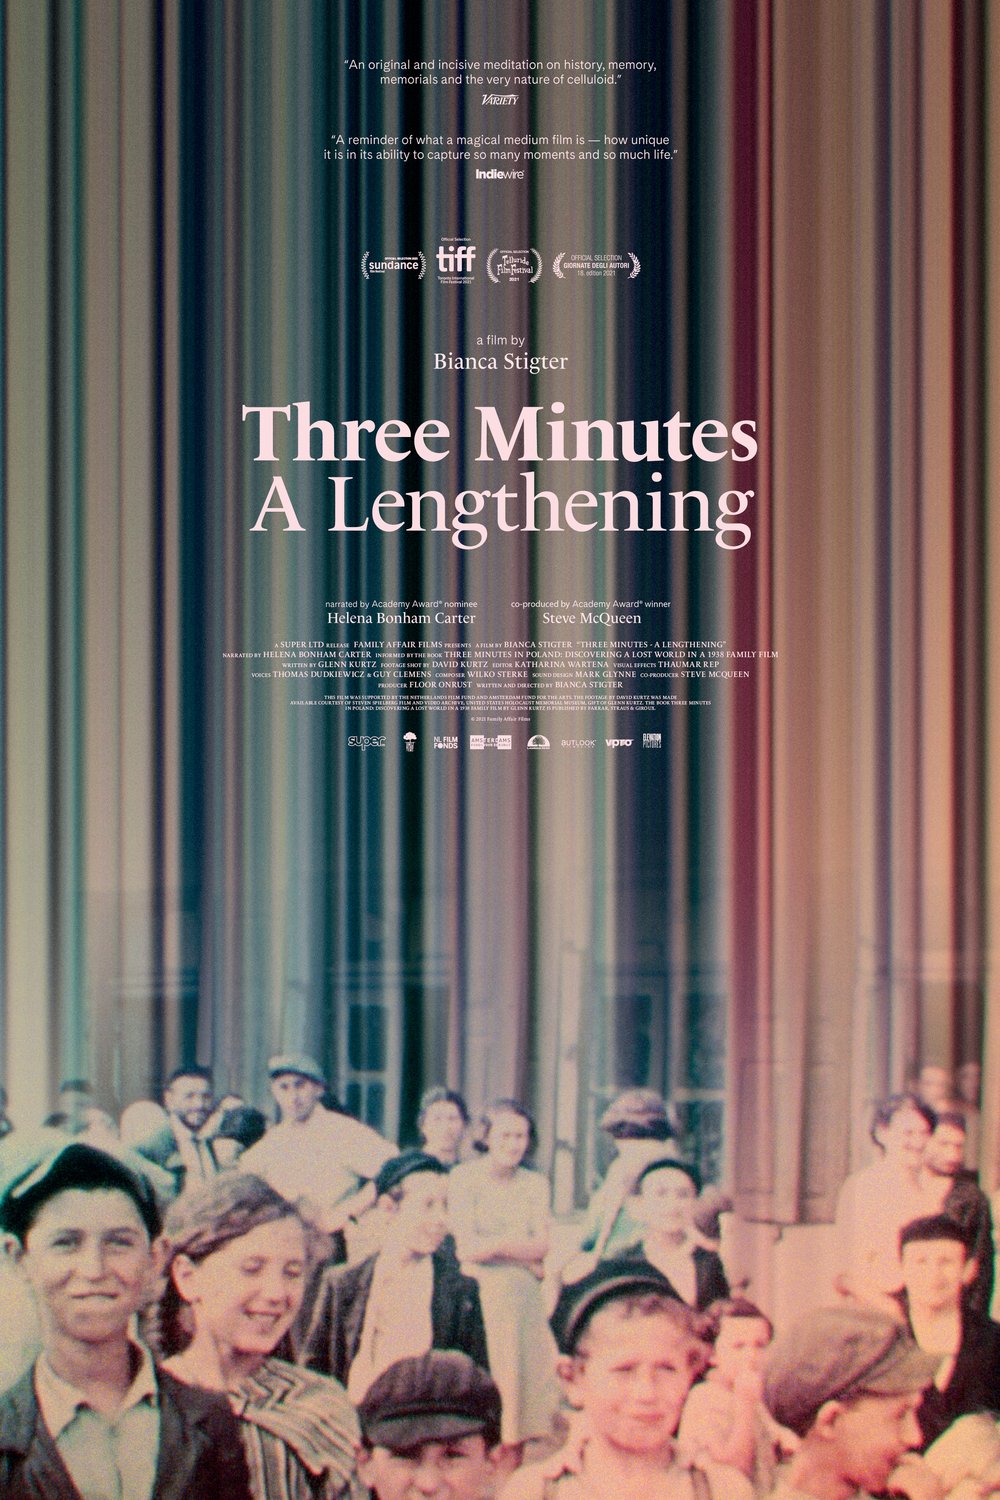 Poster of the movie Three Minutes - A Lengthening